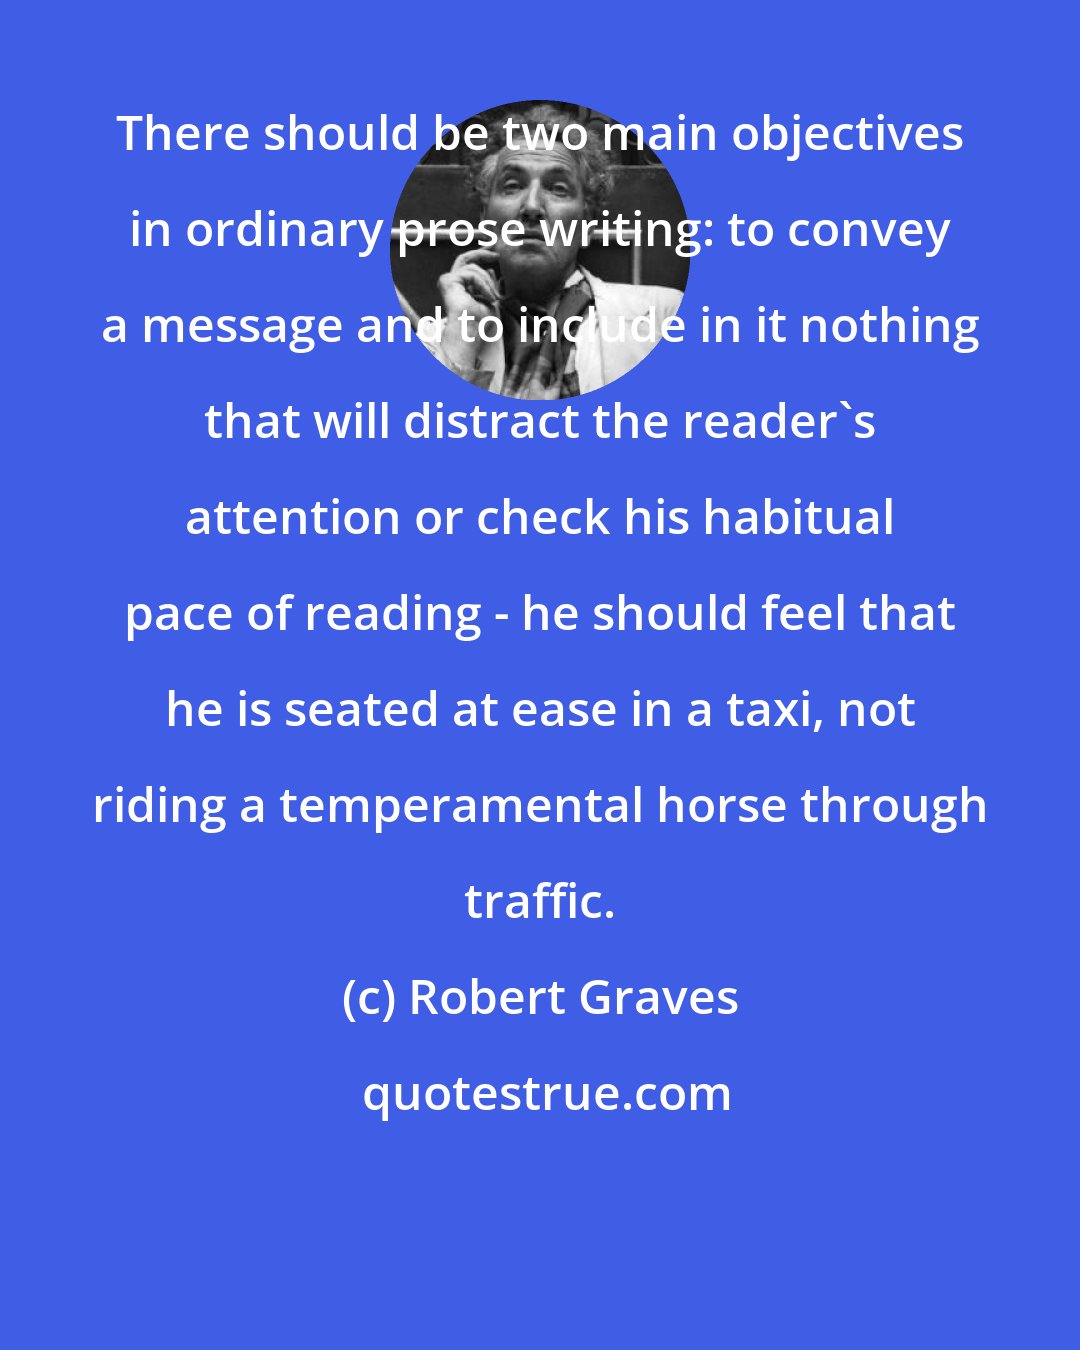 Robert Graves: There should be two main objectives in ordinary prose writing: to convey a message and to include in it nothing that will distract the reader's attention or check his habitual pace of reading - he should feel that he is seated at ease in a taxi, not riding a temperamental horse through traffic.